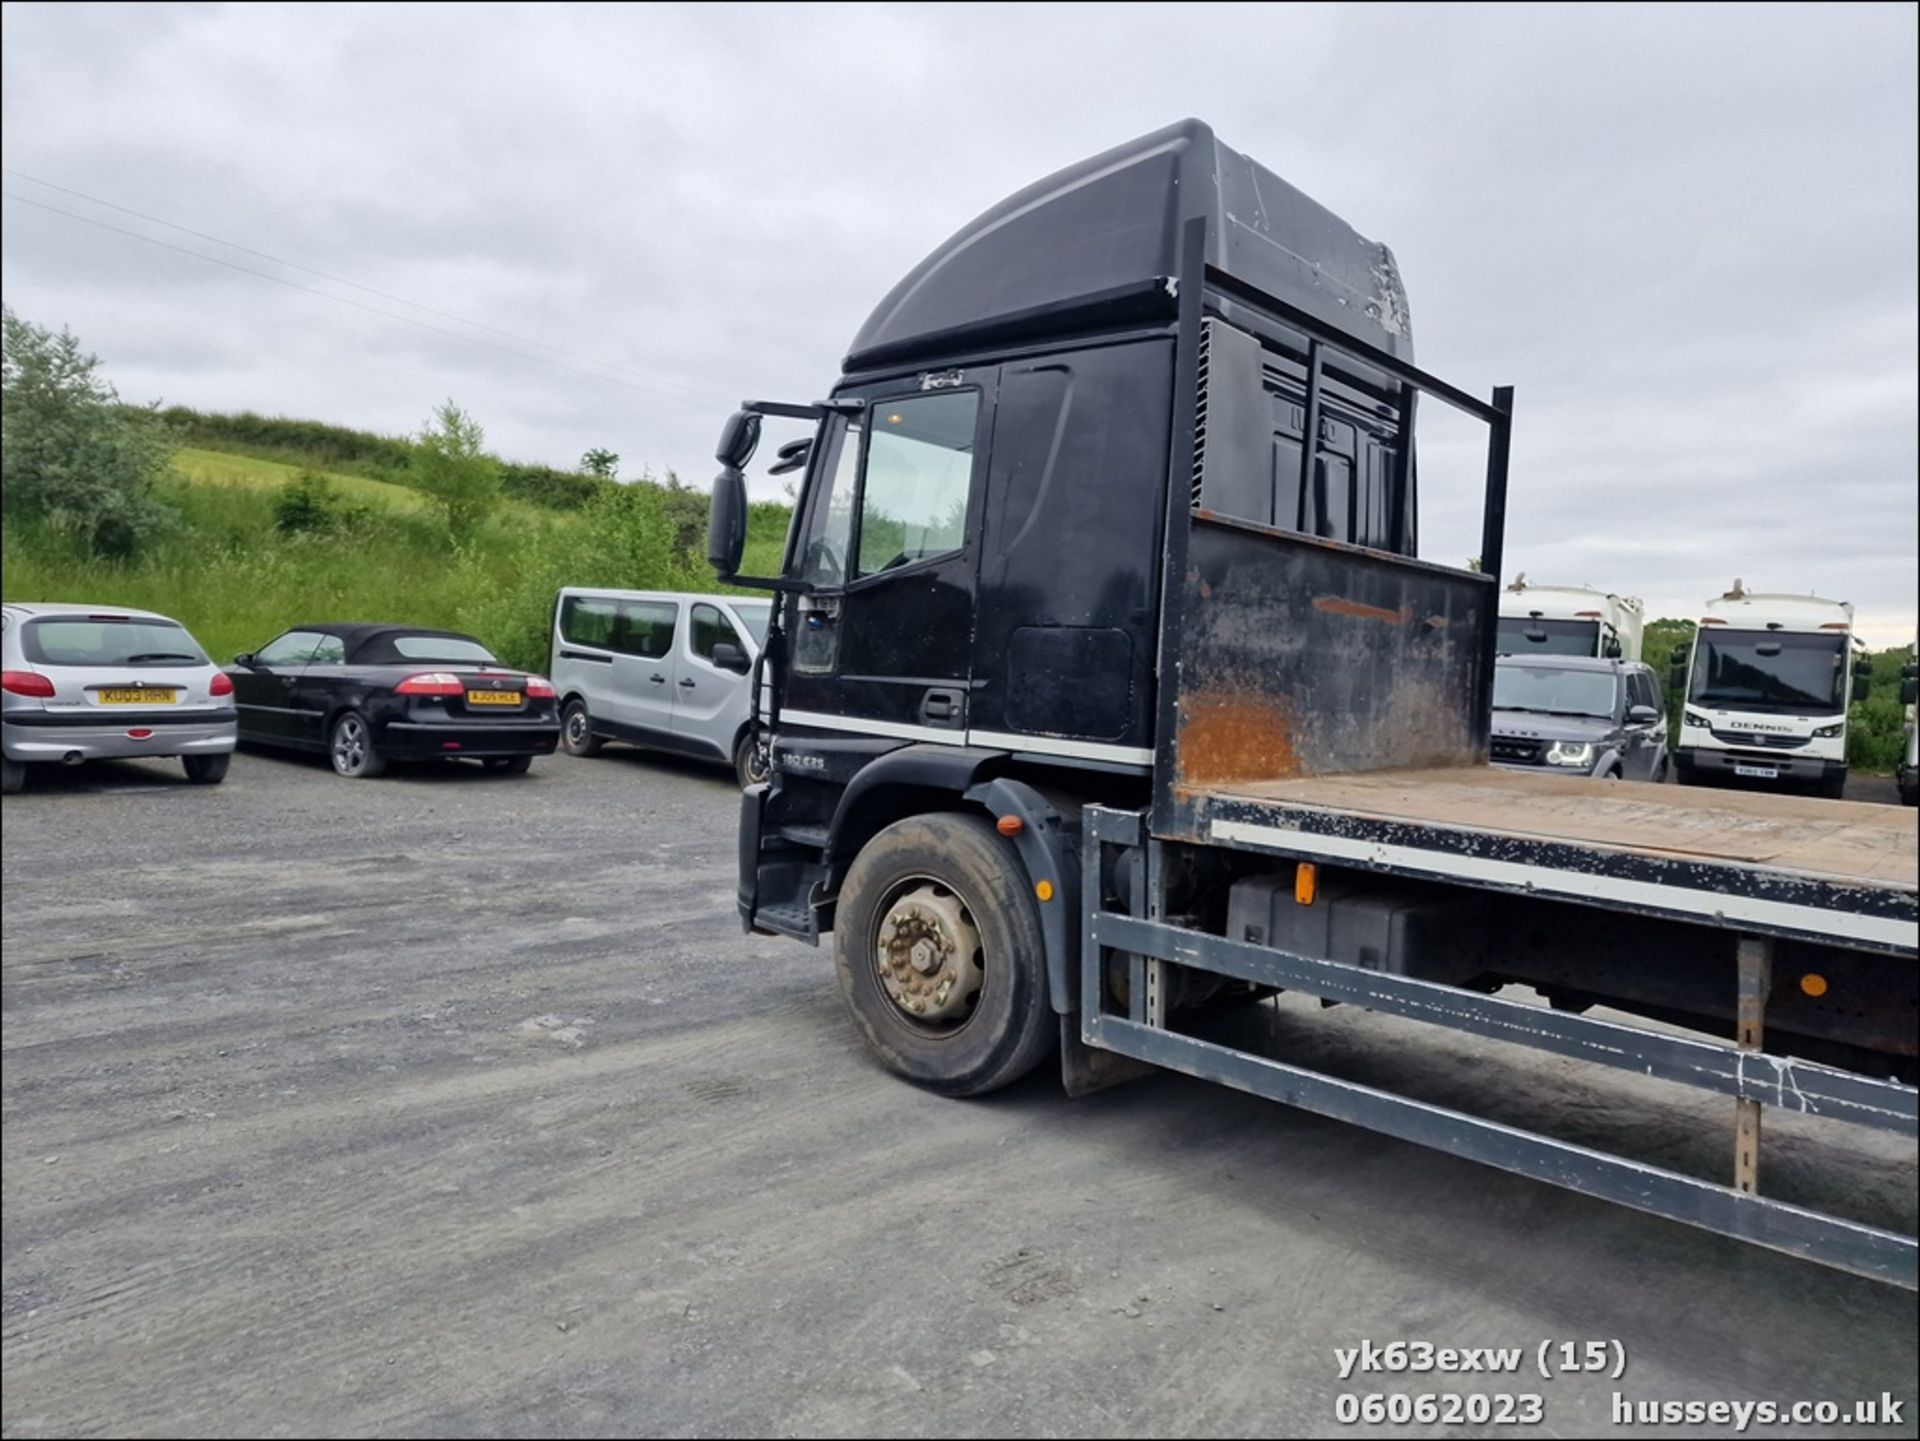 13/63 IVECO EUROCARGO (MY 2008) - 5880cc 2dr Flat Bed (Black) - Image 15 of 21